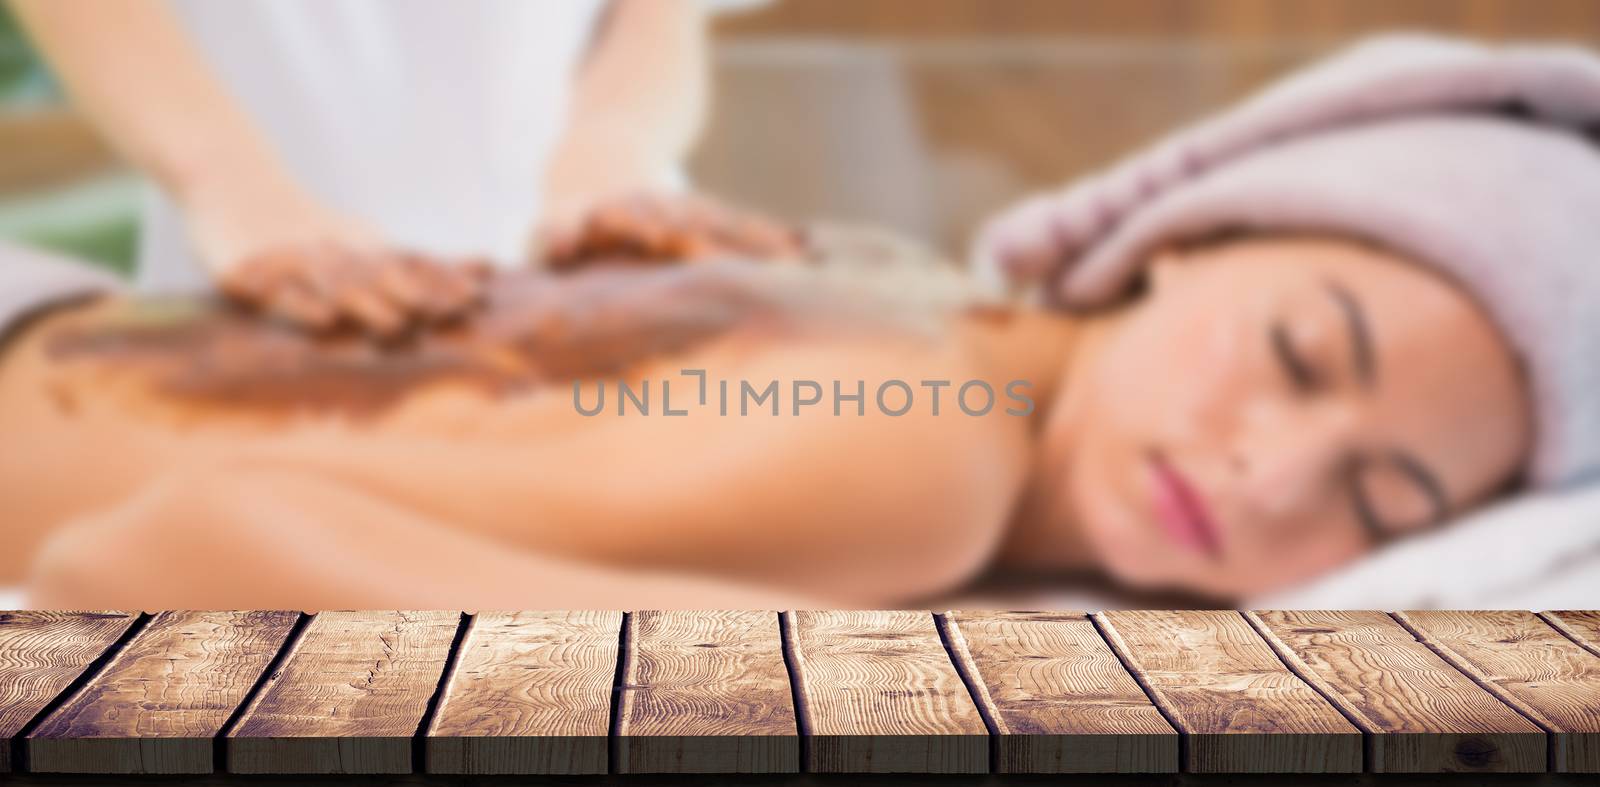 Attractive woman receiving chocolate back mask at spa center against wooden desk